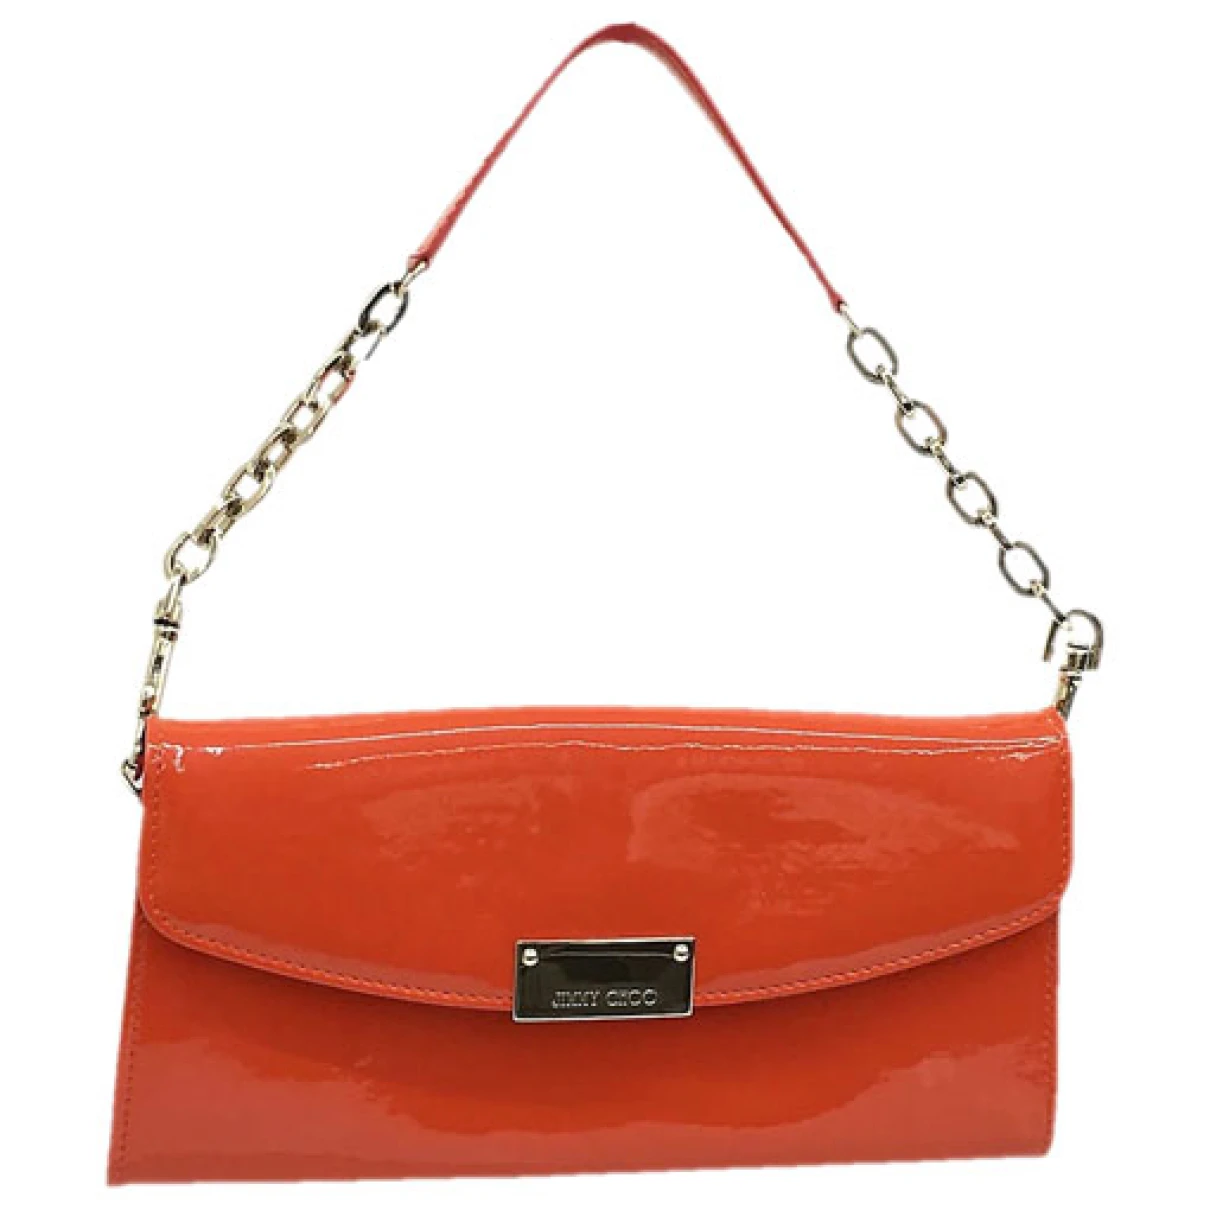 Pre-owned Jimmy Choo Patent Leather Handbag In Red